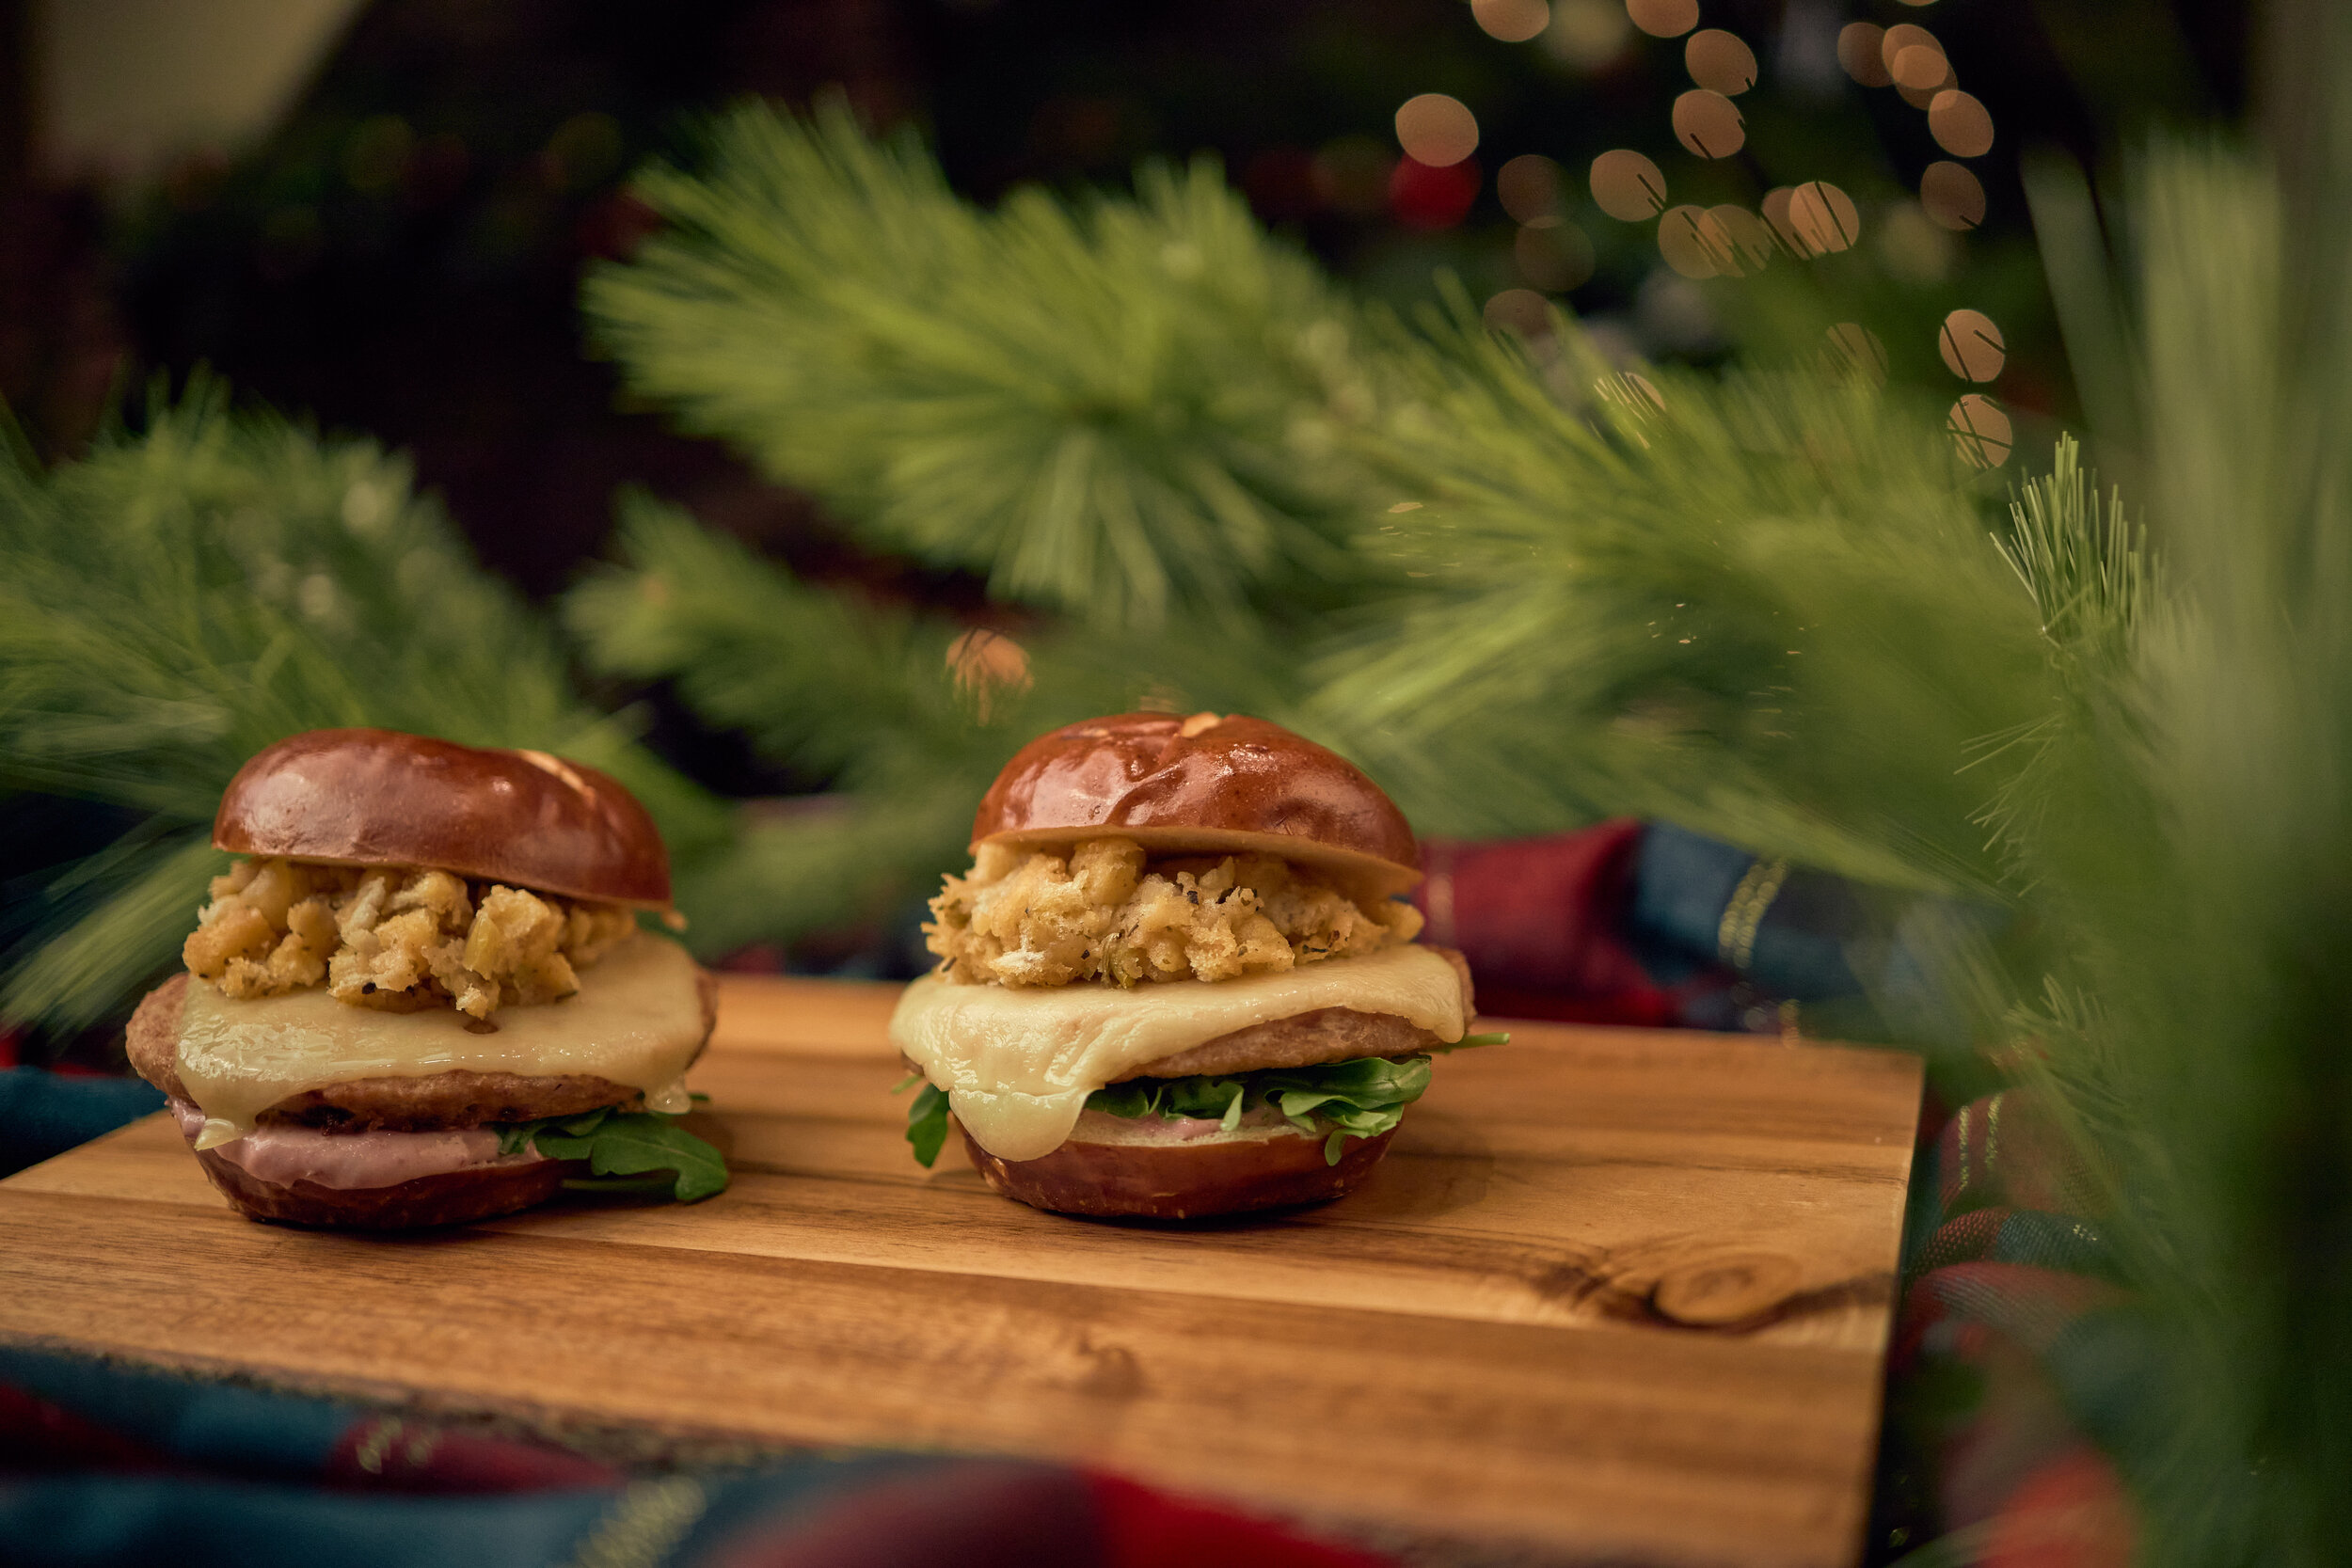 Vixen’s Turkey Burger with Cheese, Cranberry Mayo and Stuffing on a Pretzel Bun.jpg